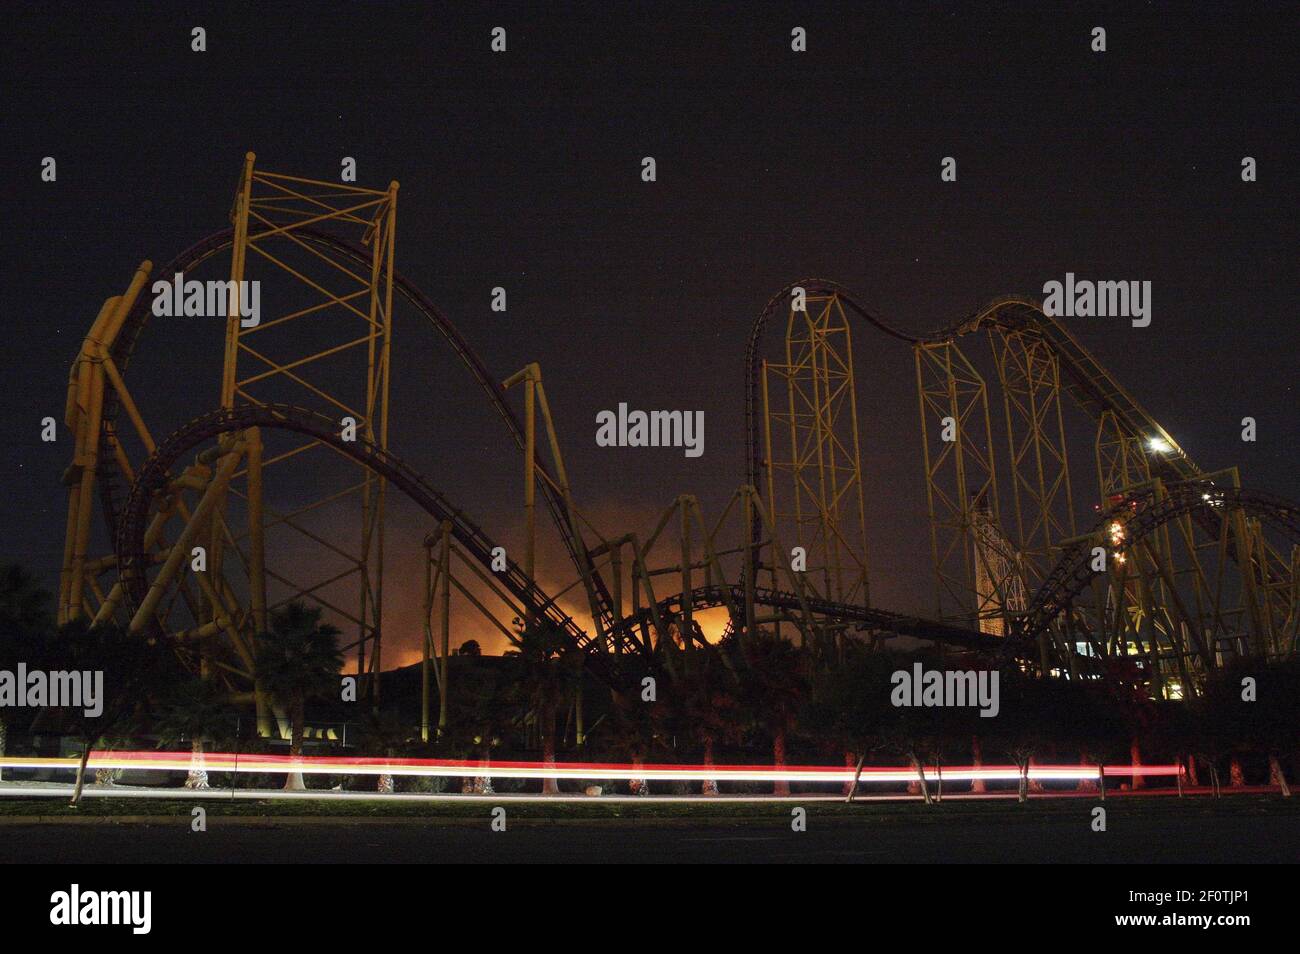 22 October 2007 - Santa Clarita, CA - The Fire which started near the Six Flags Magic Mountain amusement park charred more than 1,200 acres on the western side of the Santa Clarita Valley, California. Photo Credit: Rod Rolle/Sipa Press/0710231433 Stock Photo